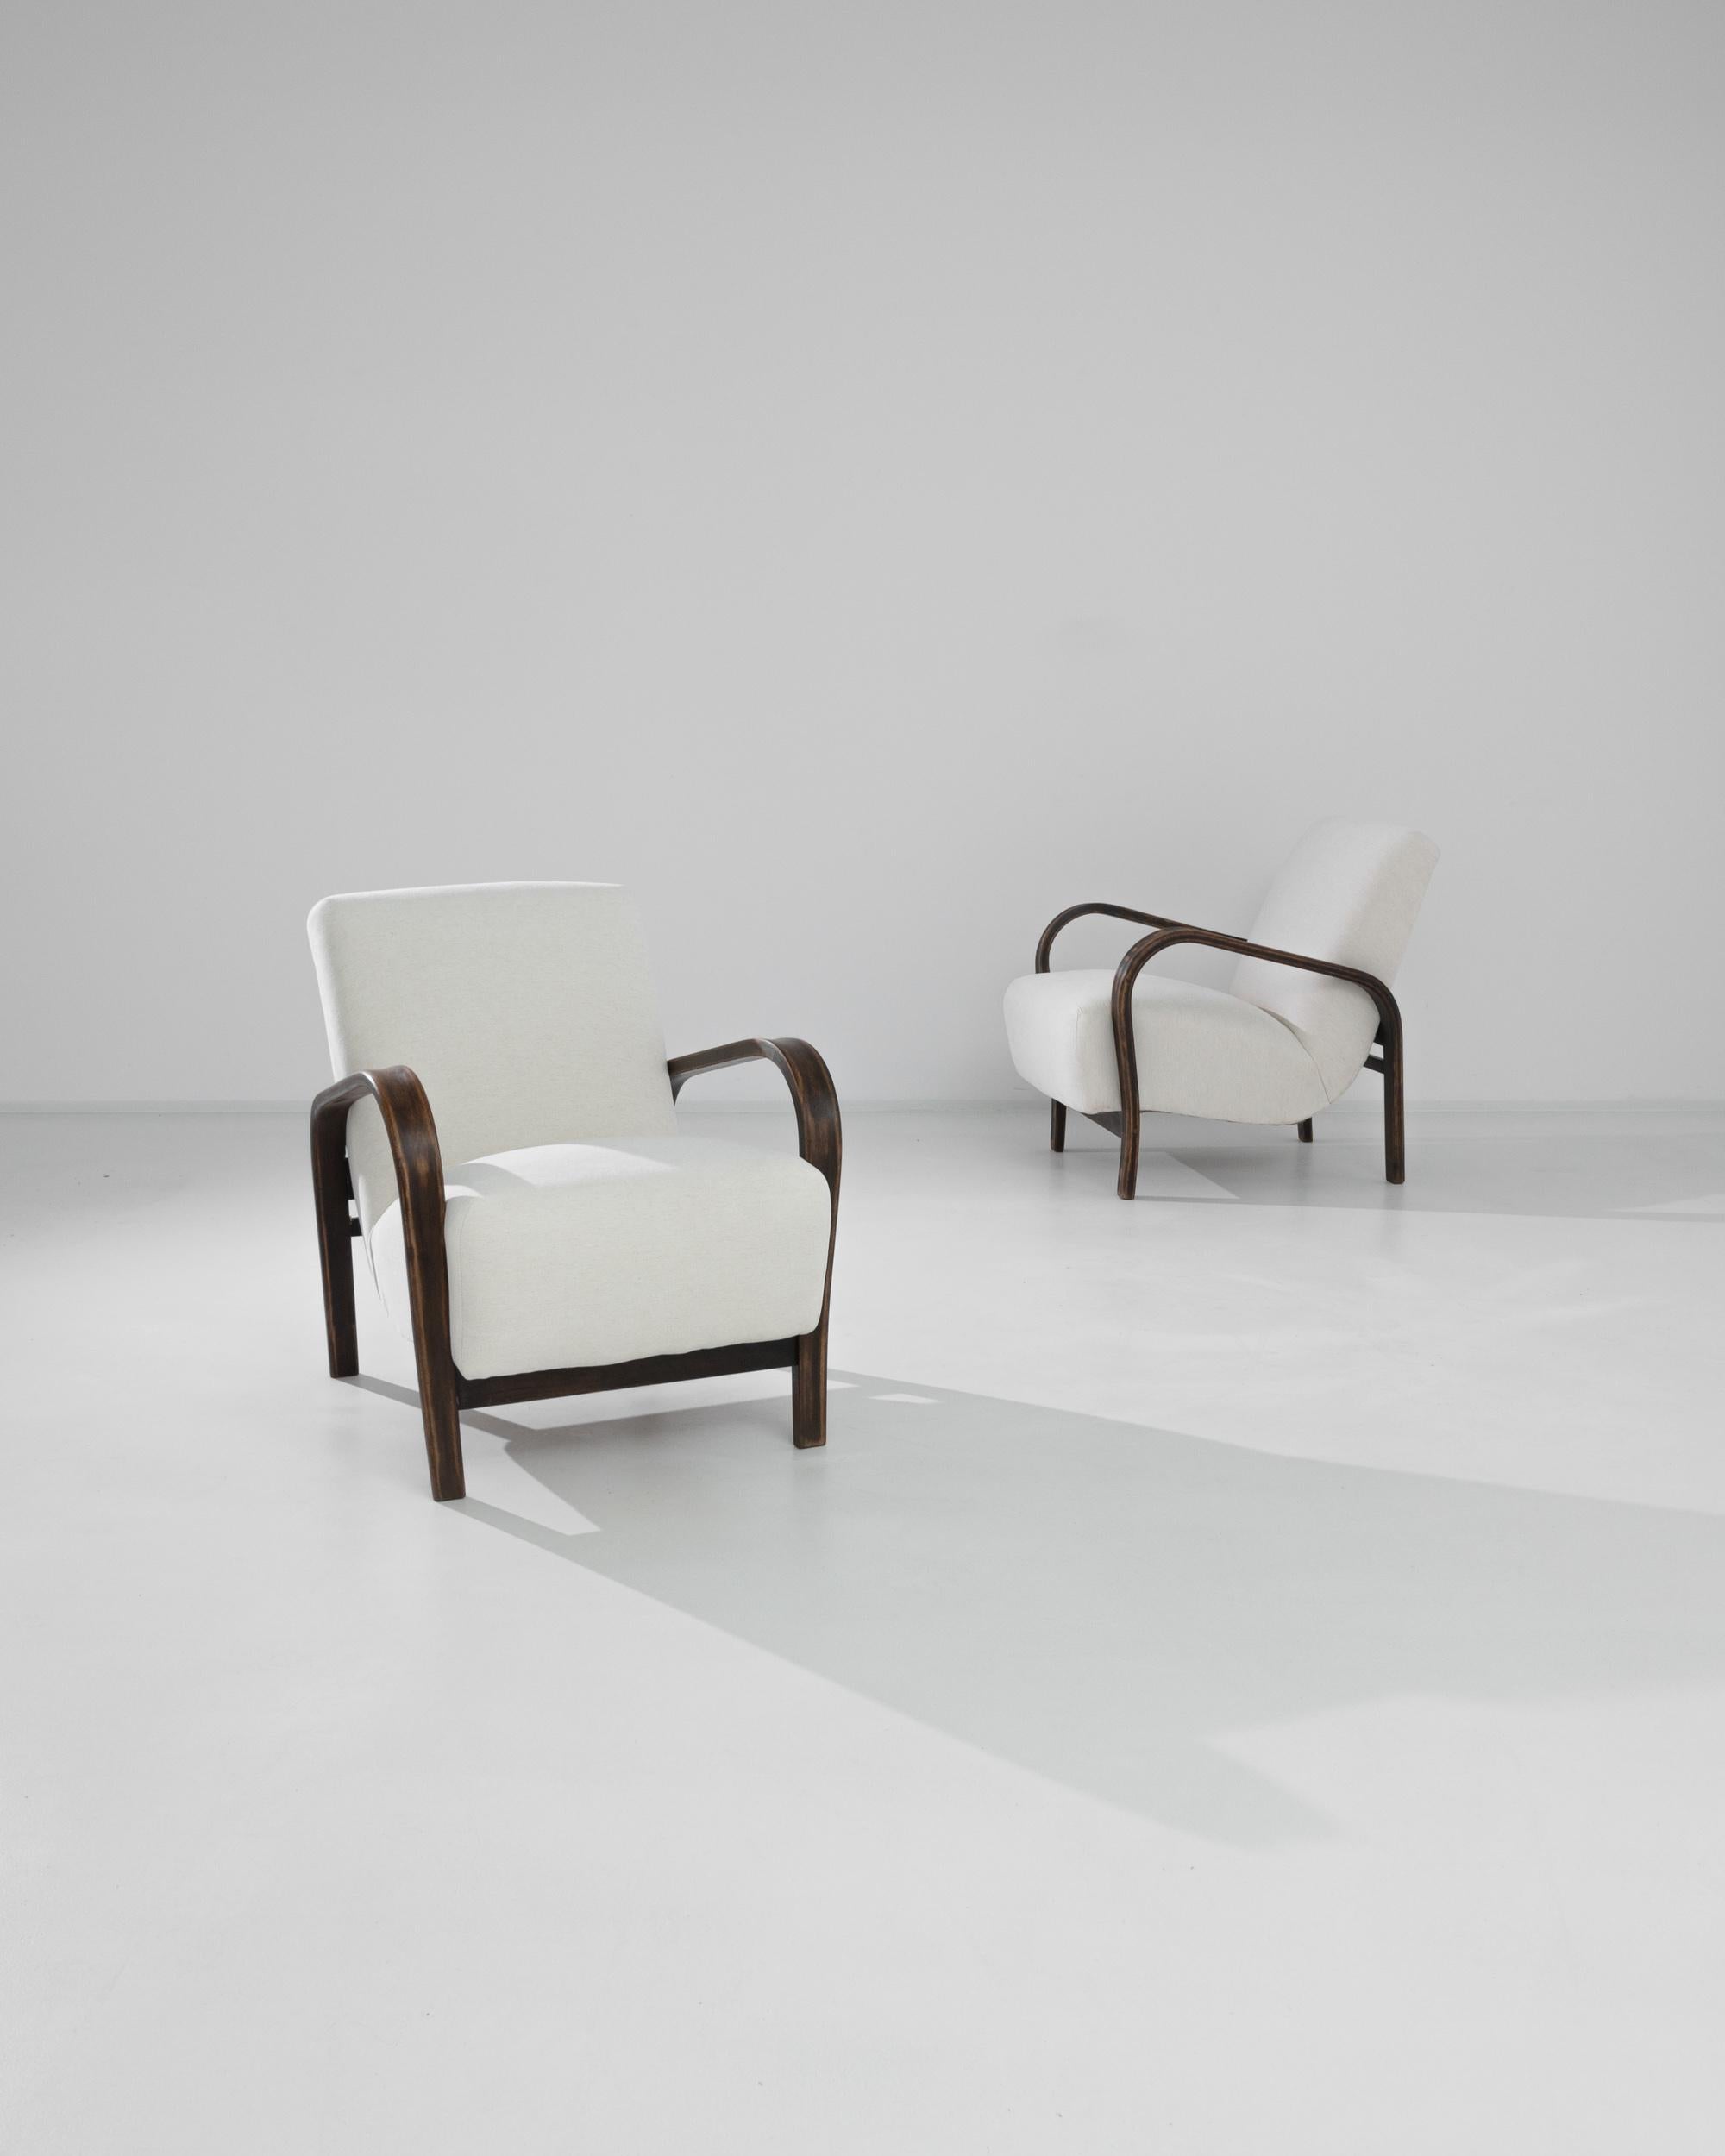 A pair of upholstered armchairs designed by Karel Kozelka and Antonin Kropácek, produced in Czechia circa 1960. Plush white curves of the cushions contrast beautifully with the dark brown of the bentwood armrests. This stylish pair is the best of